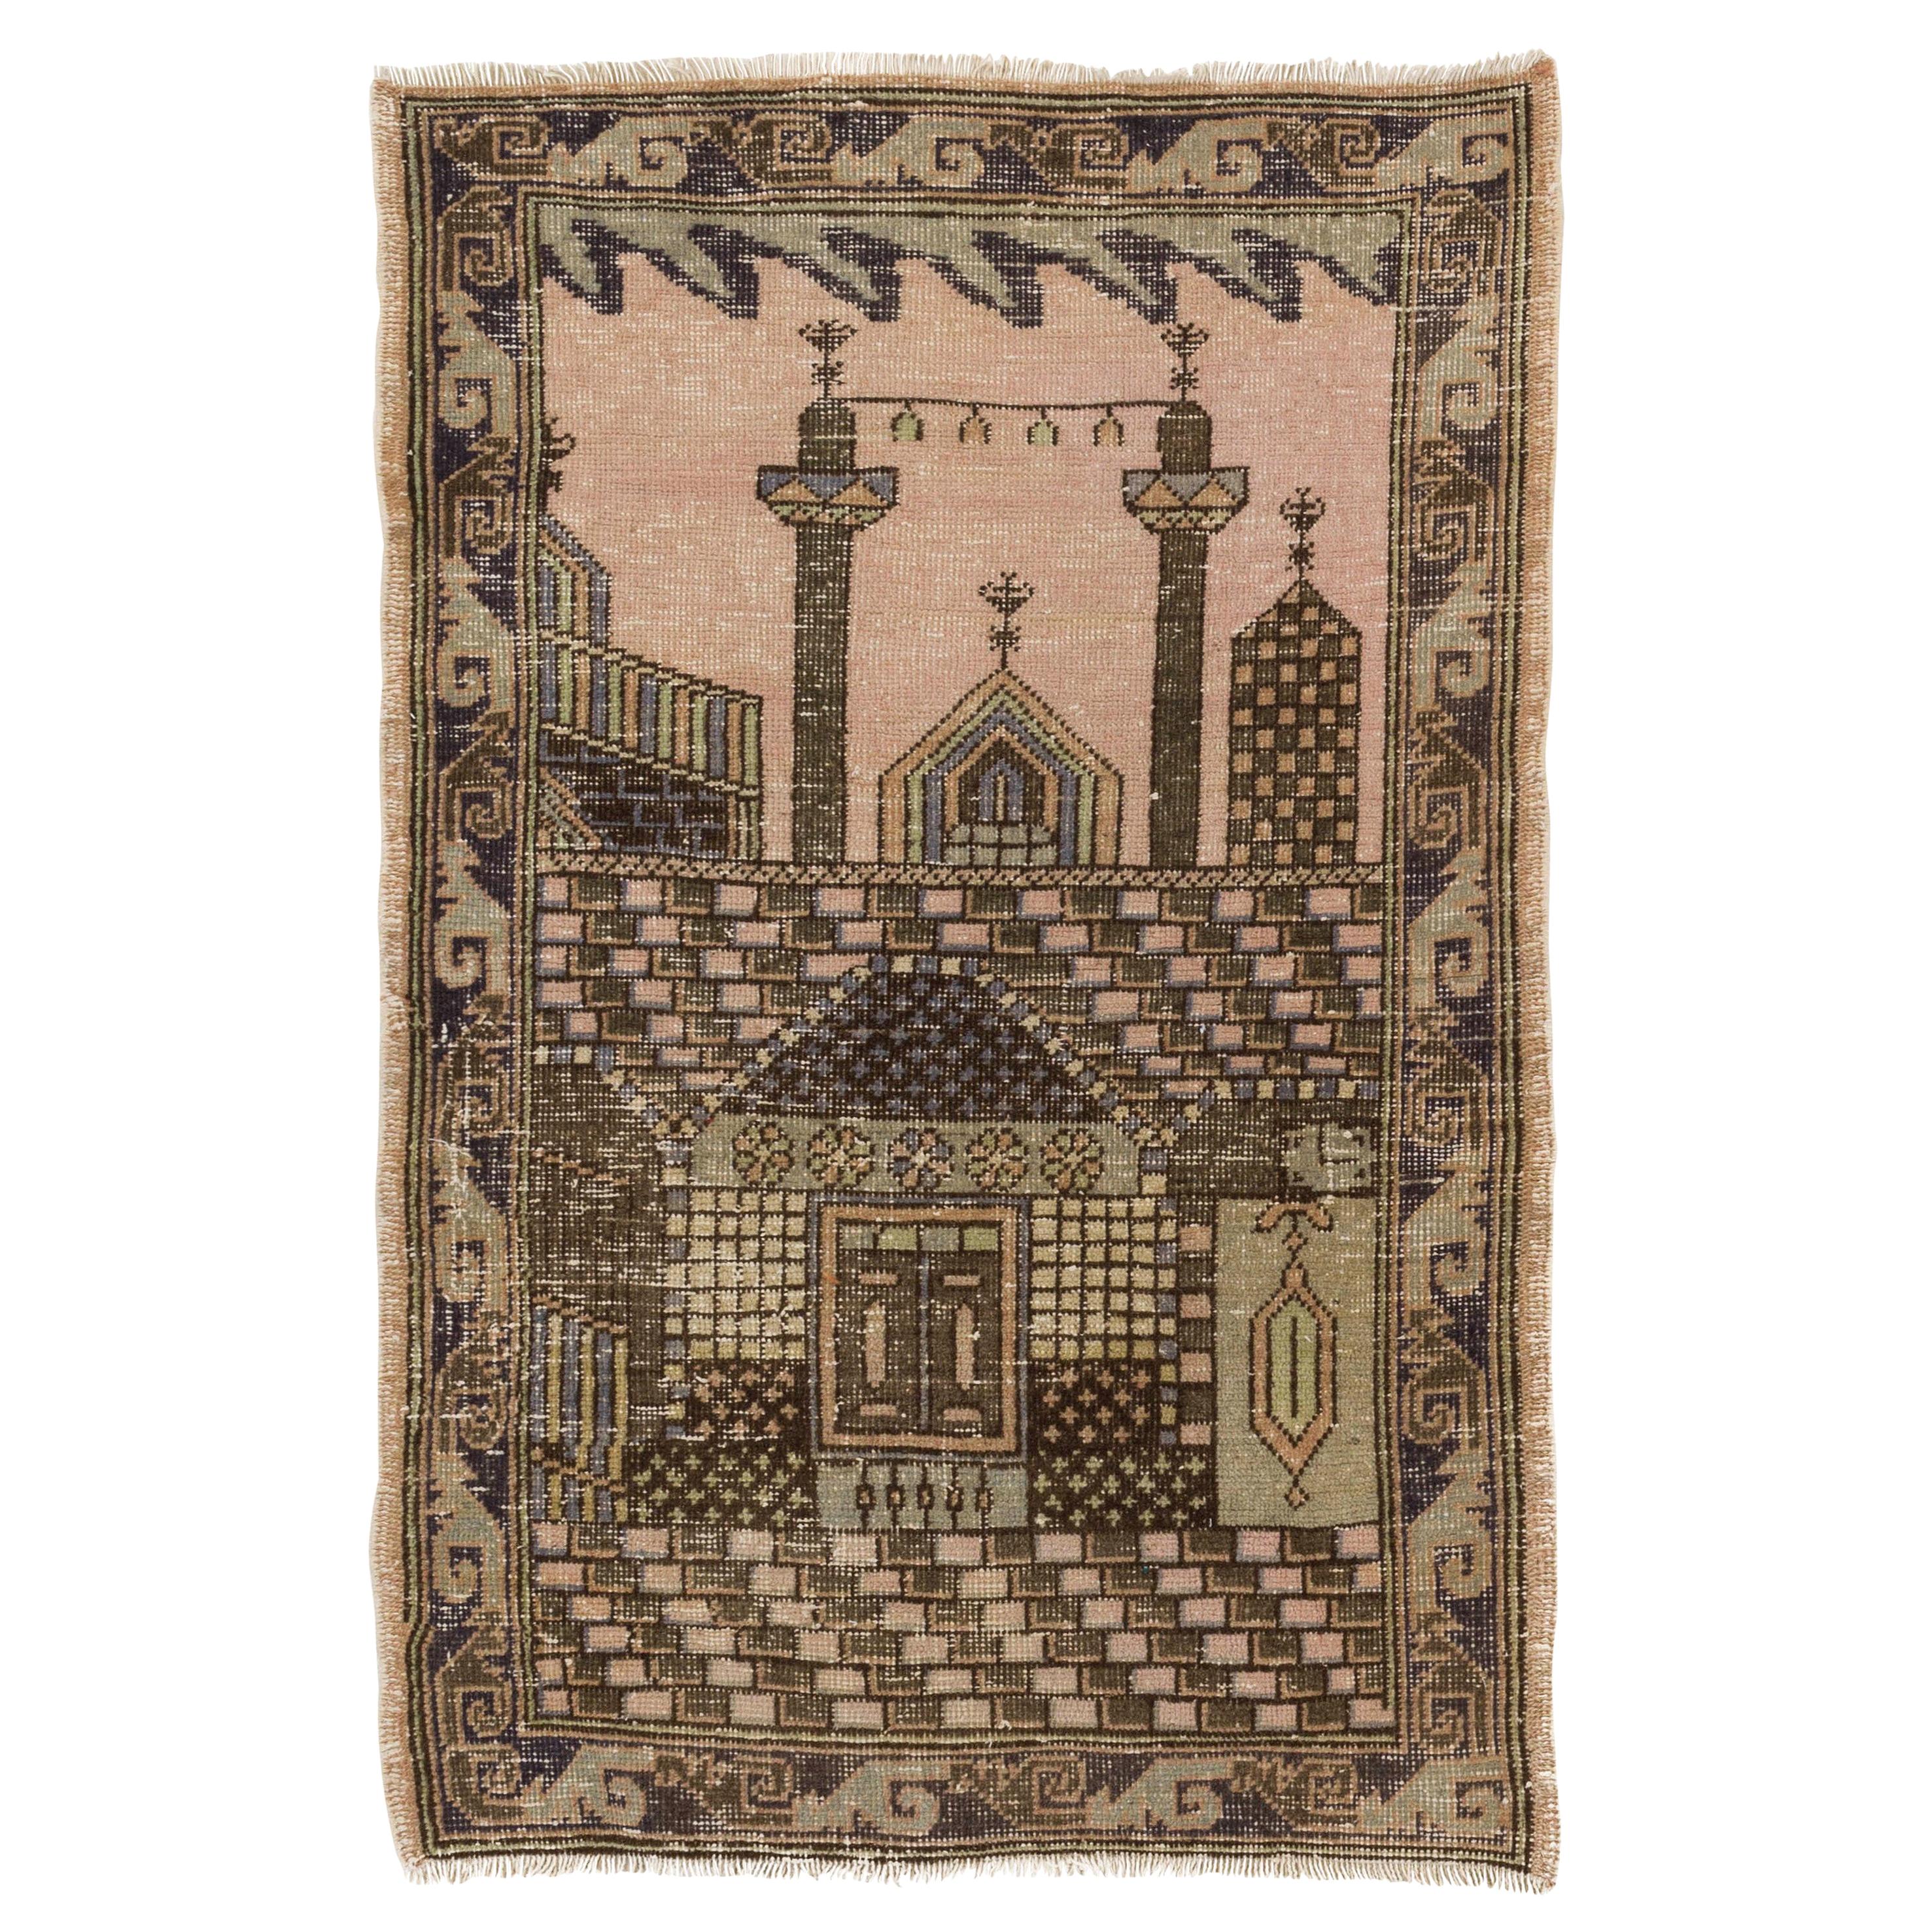 2.7x4 Ft Vintage One-of-a-Kind Pictorial Anatolian Prayer Rug Depicting a Mosque